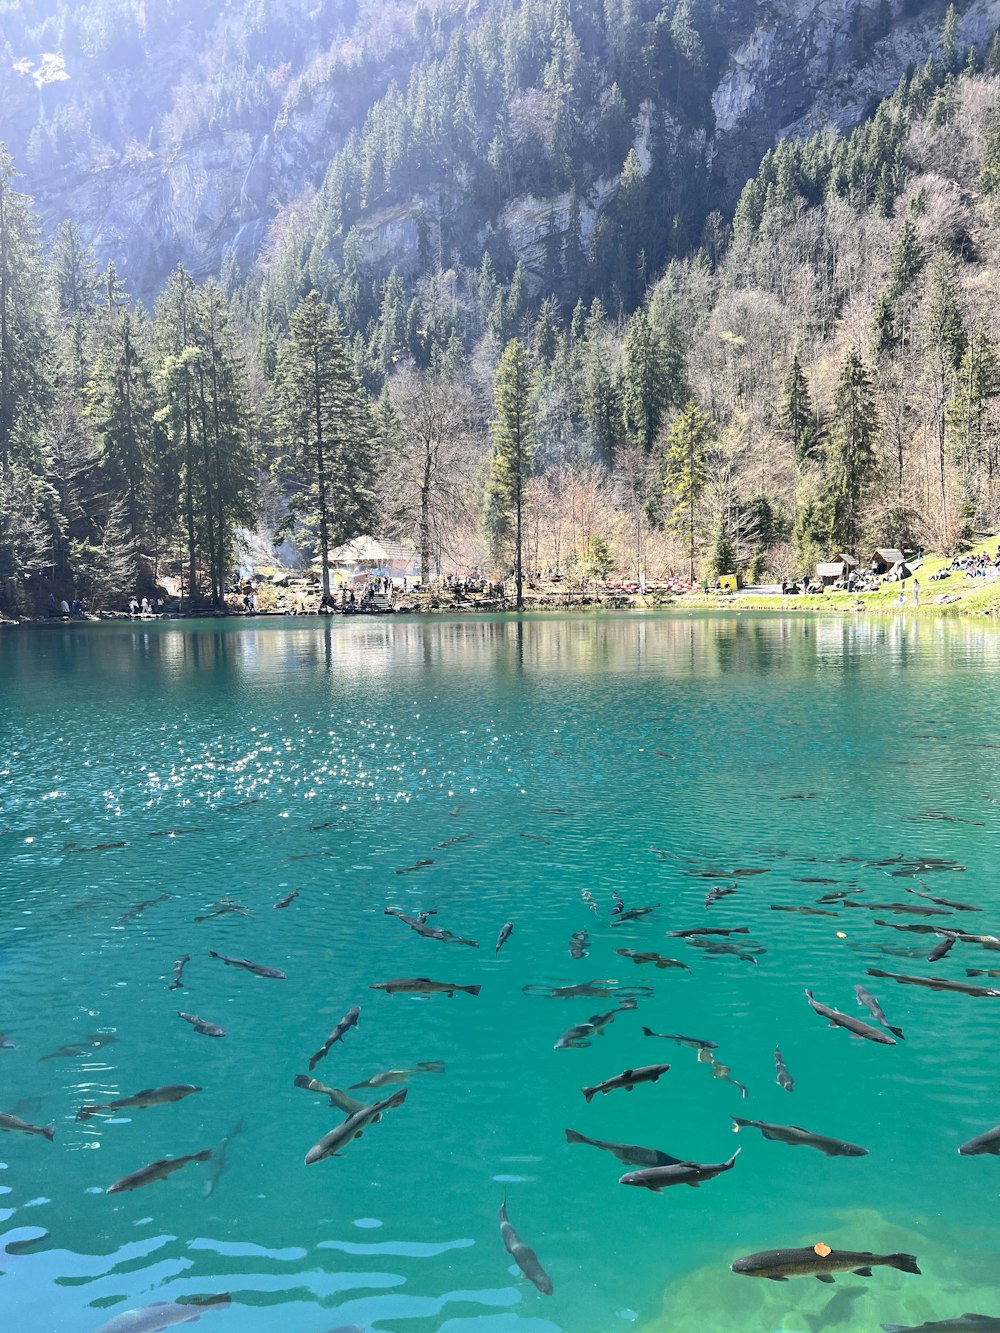 a large group of fish swimming in a lake